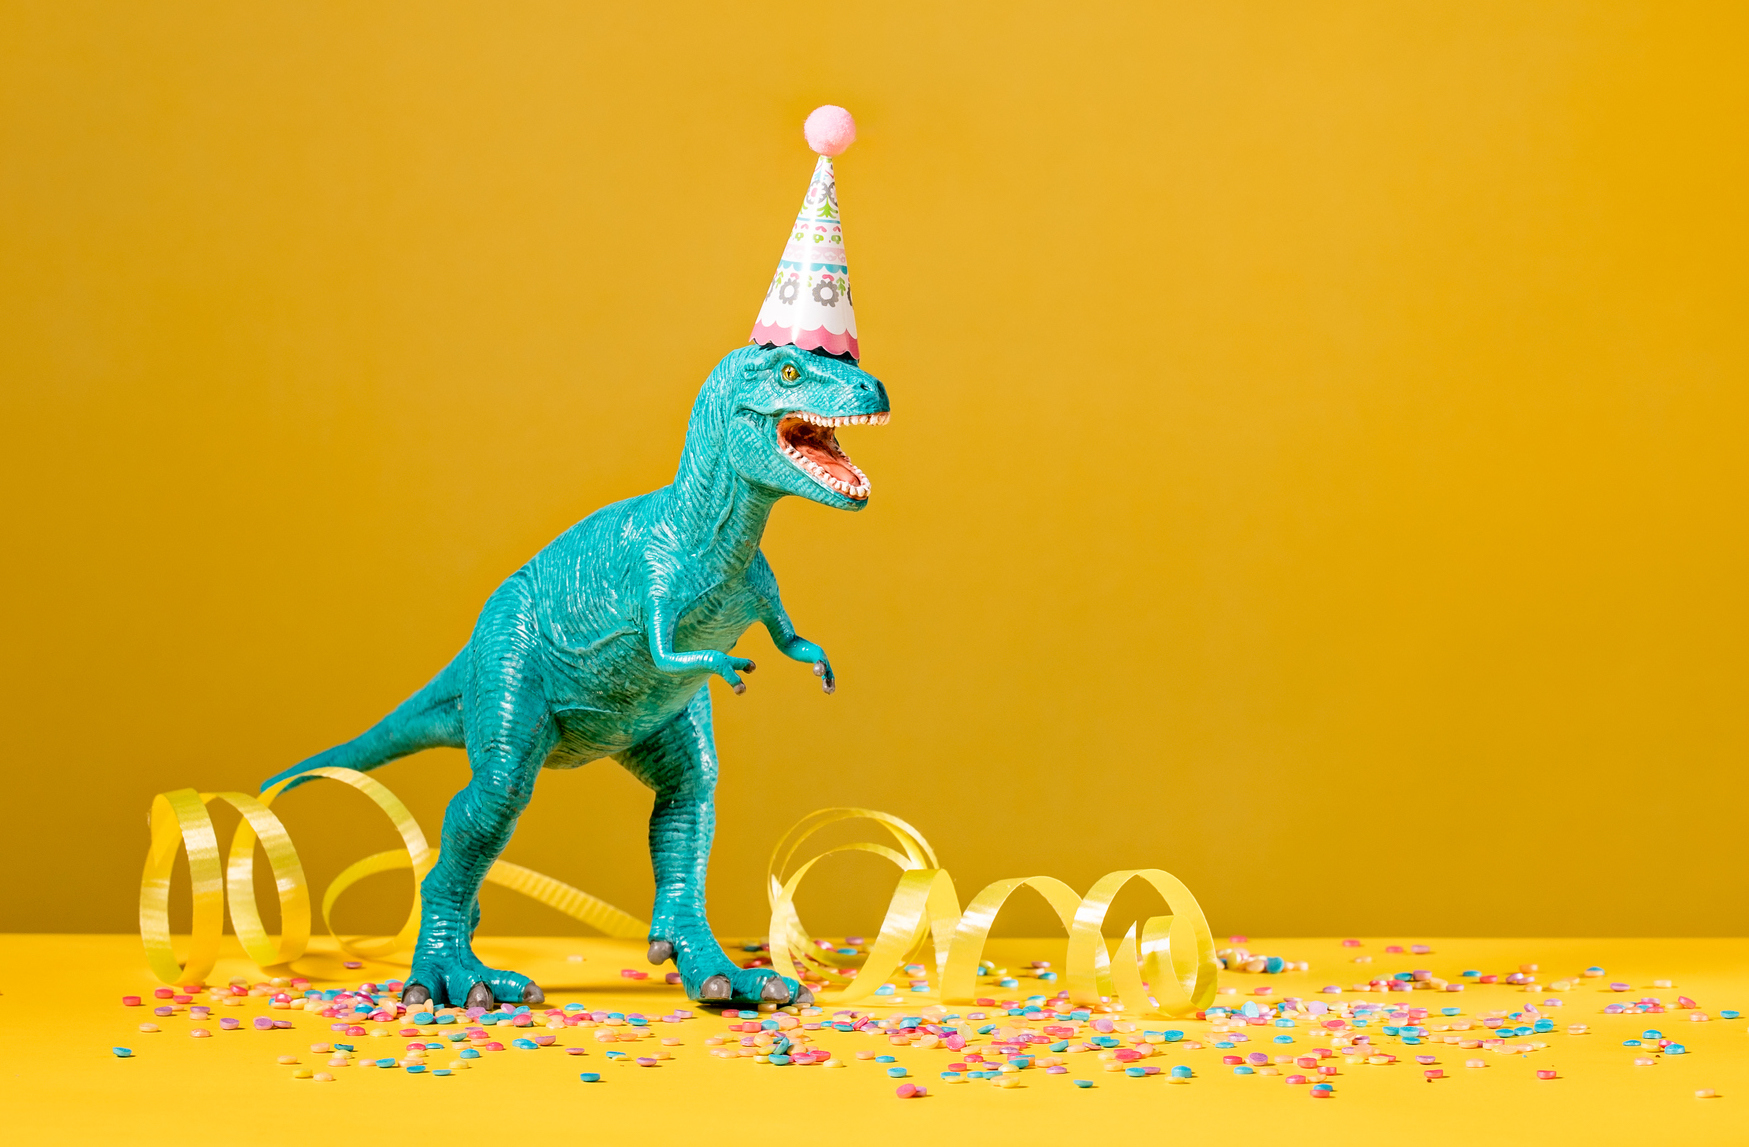 A dinosaur getting into the party spirit